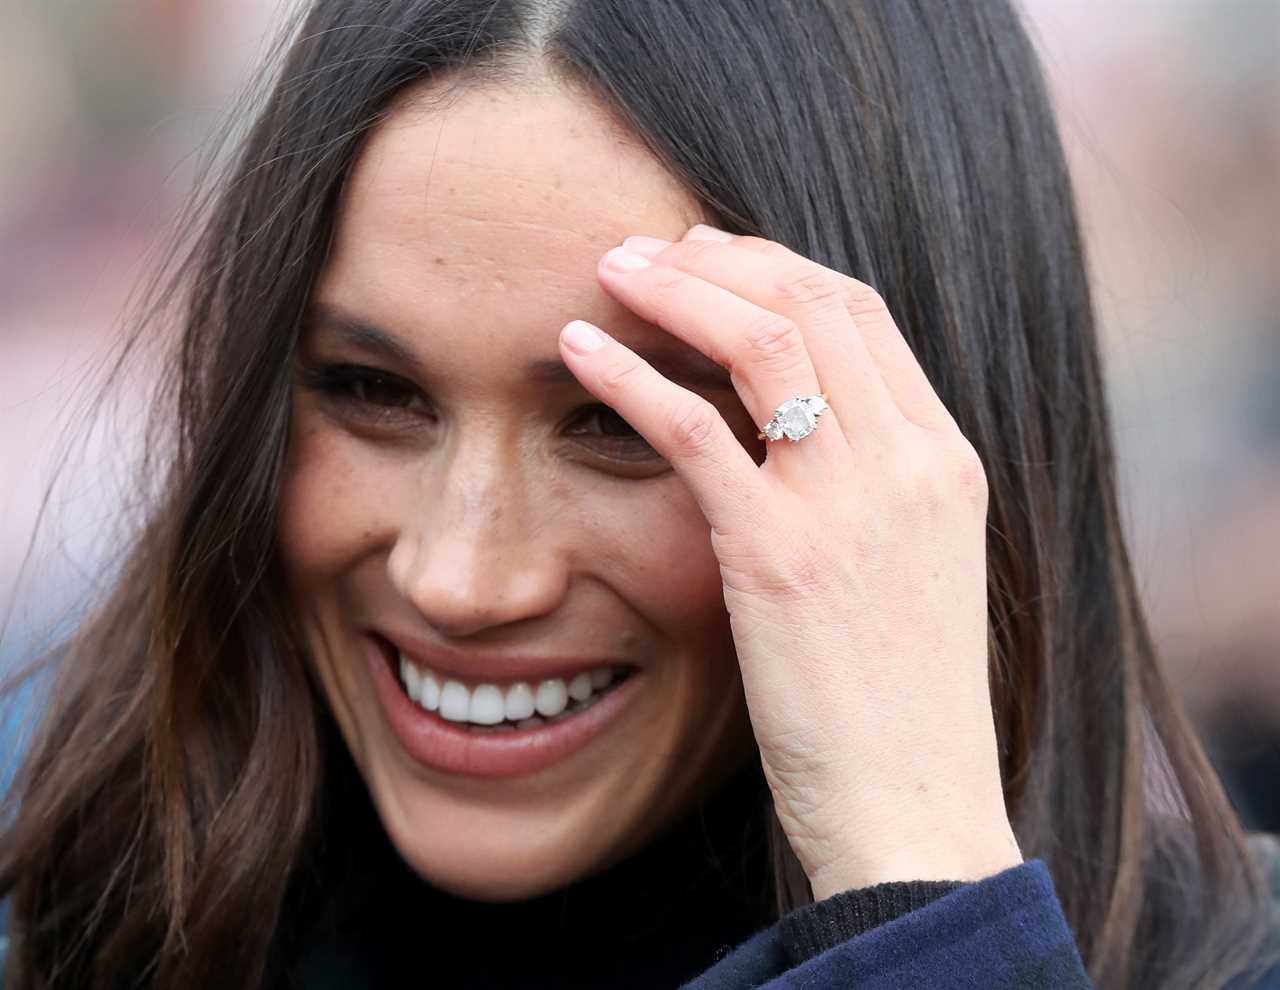 Botswana is so special to the couple, that the main stone in Meghan's engagement ring is from the African country